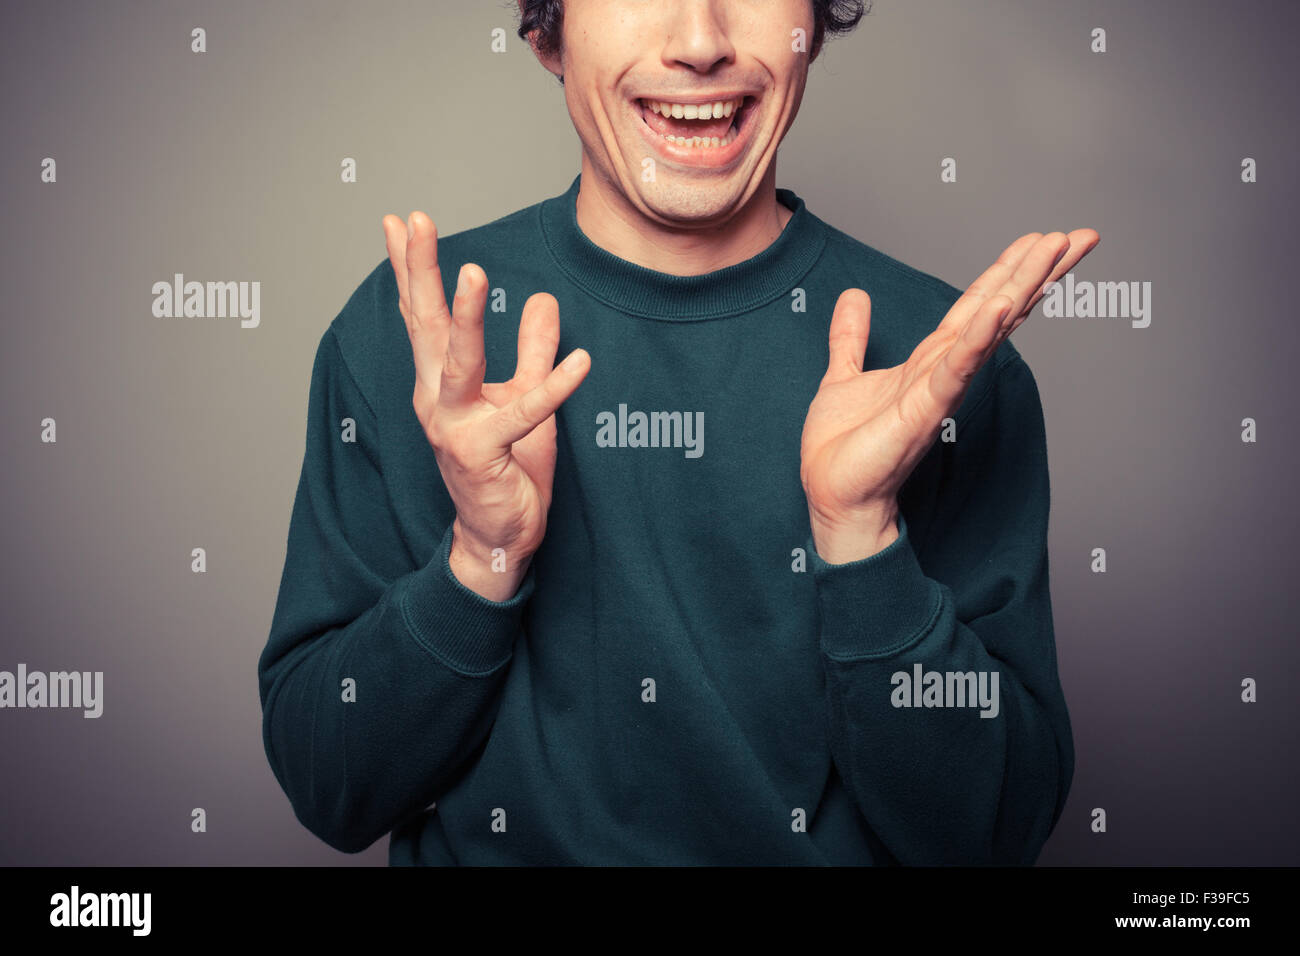 A young man is gesturing and pulling silly faces Stock Photo